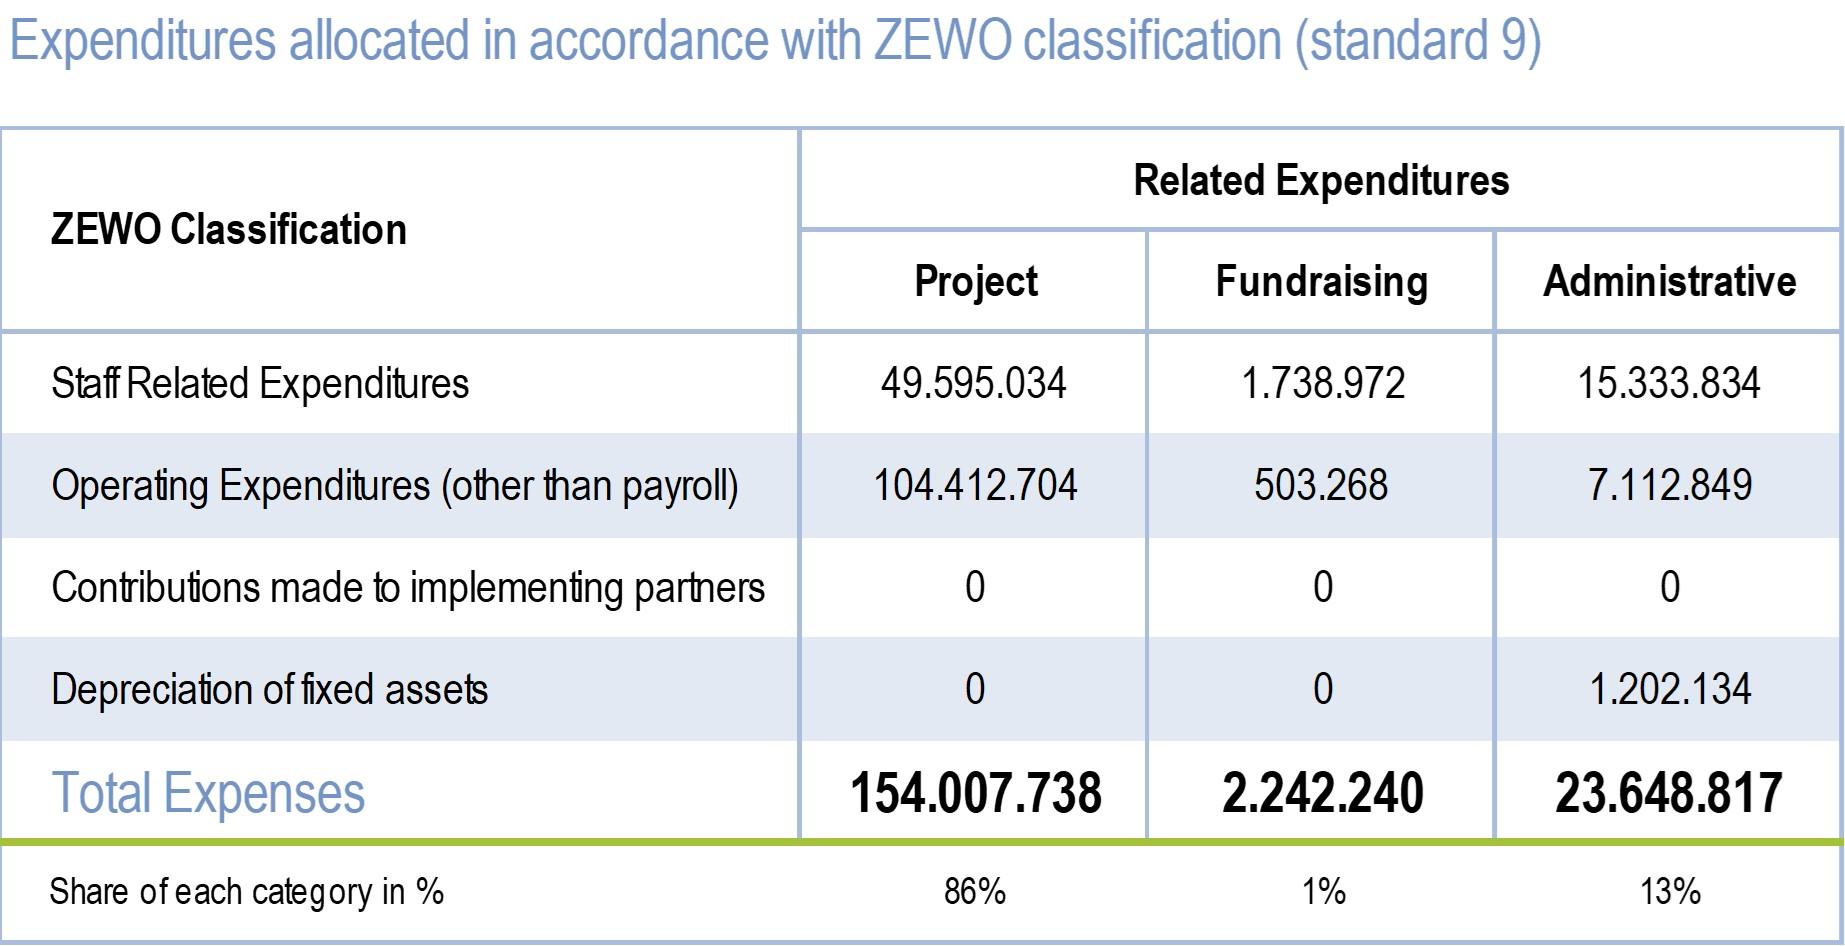 LWF Annual Report 2022 - Expenditure by ZEWO Classification